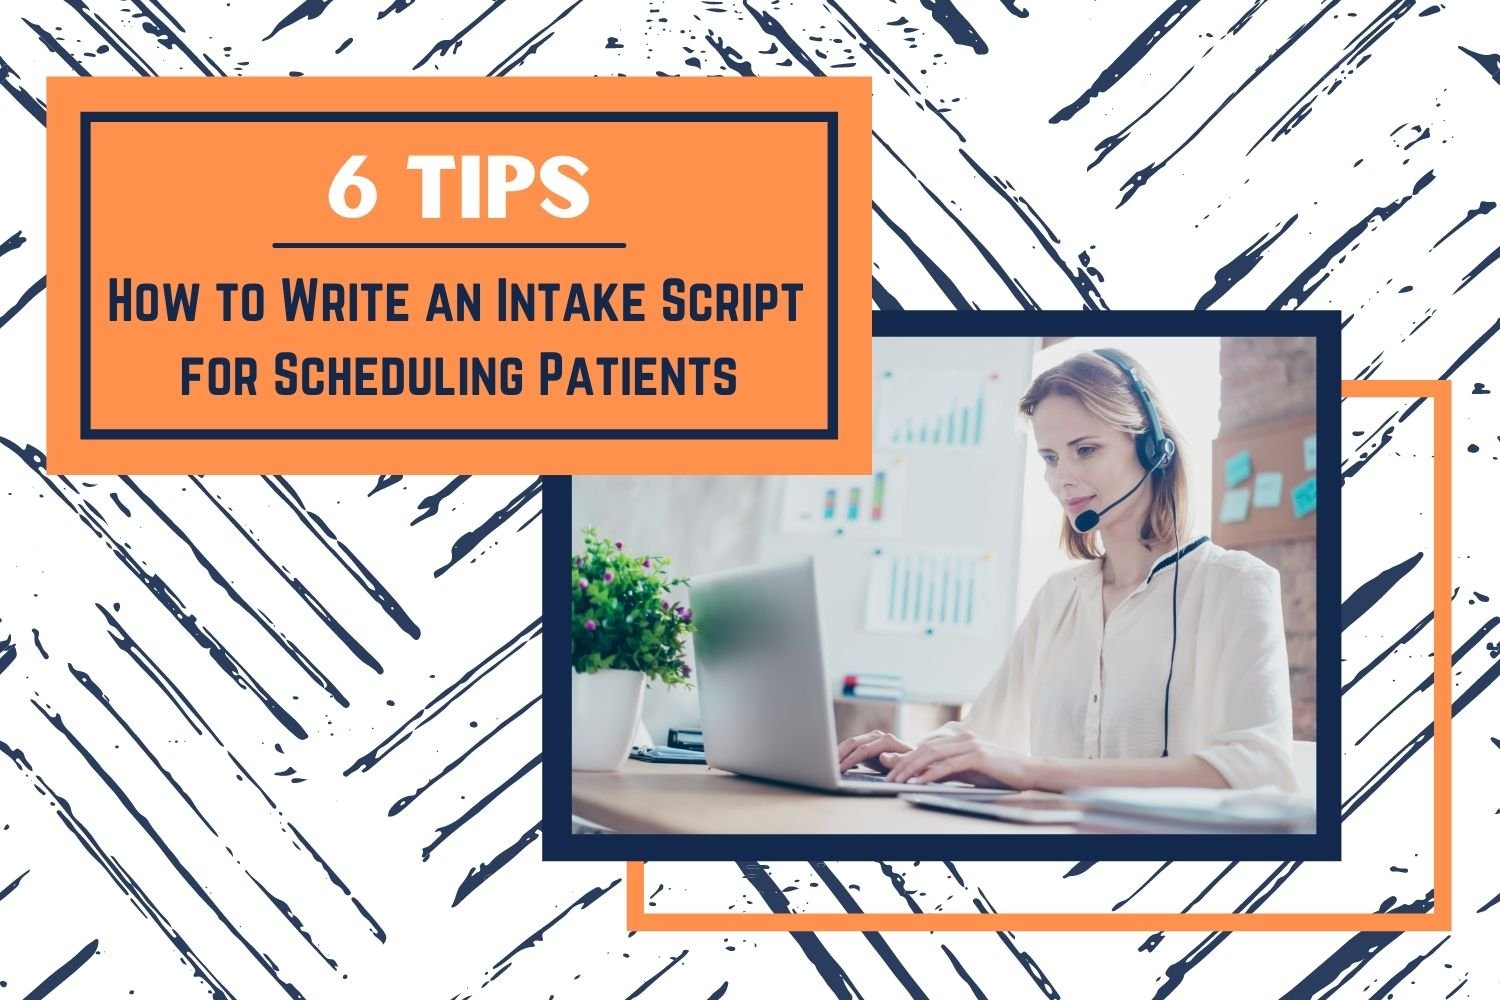 How to Write an Intake Script for Scheduling Patients (6 Tips)